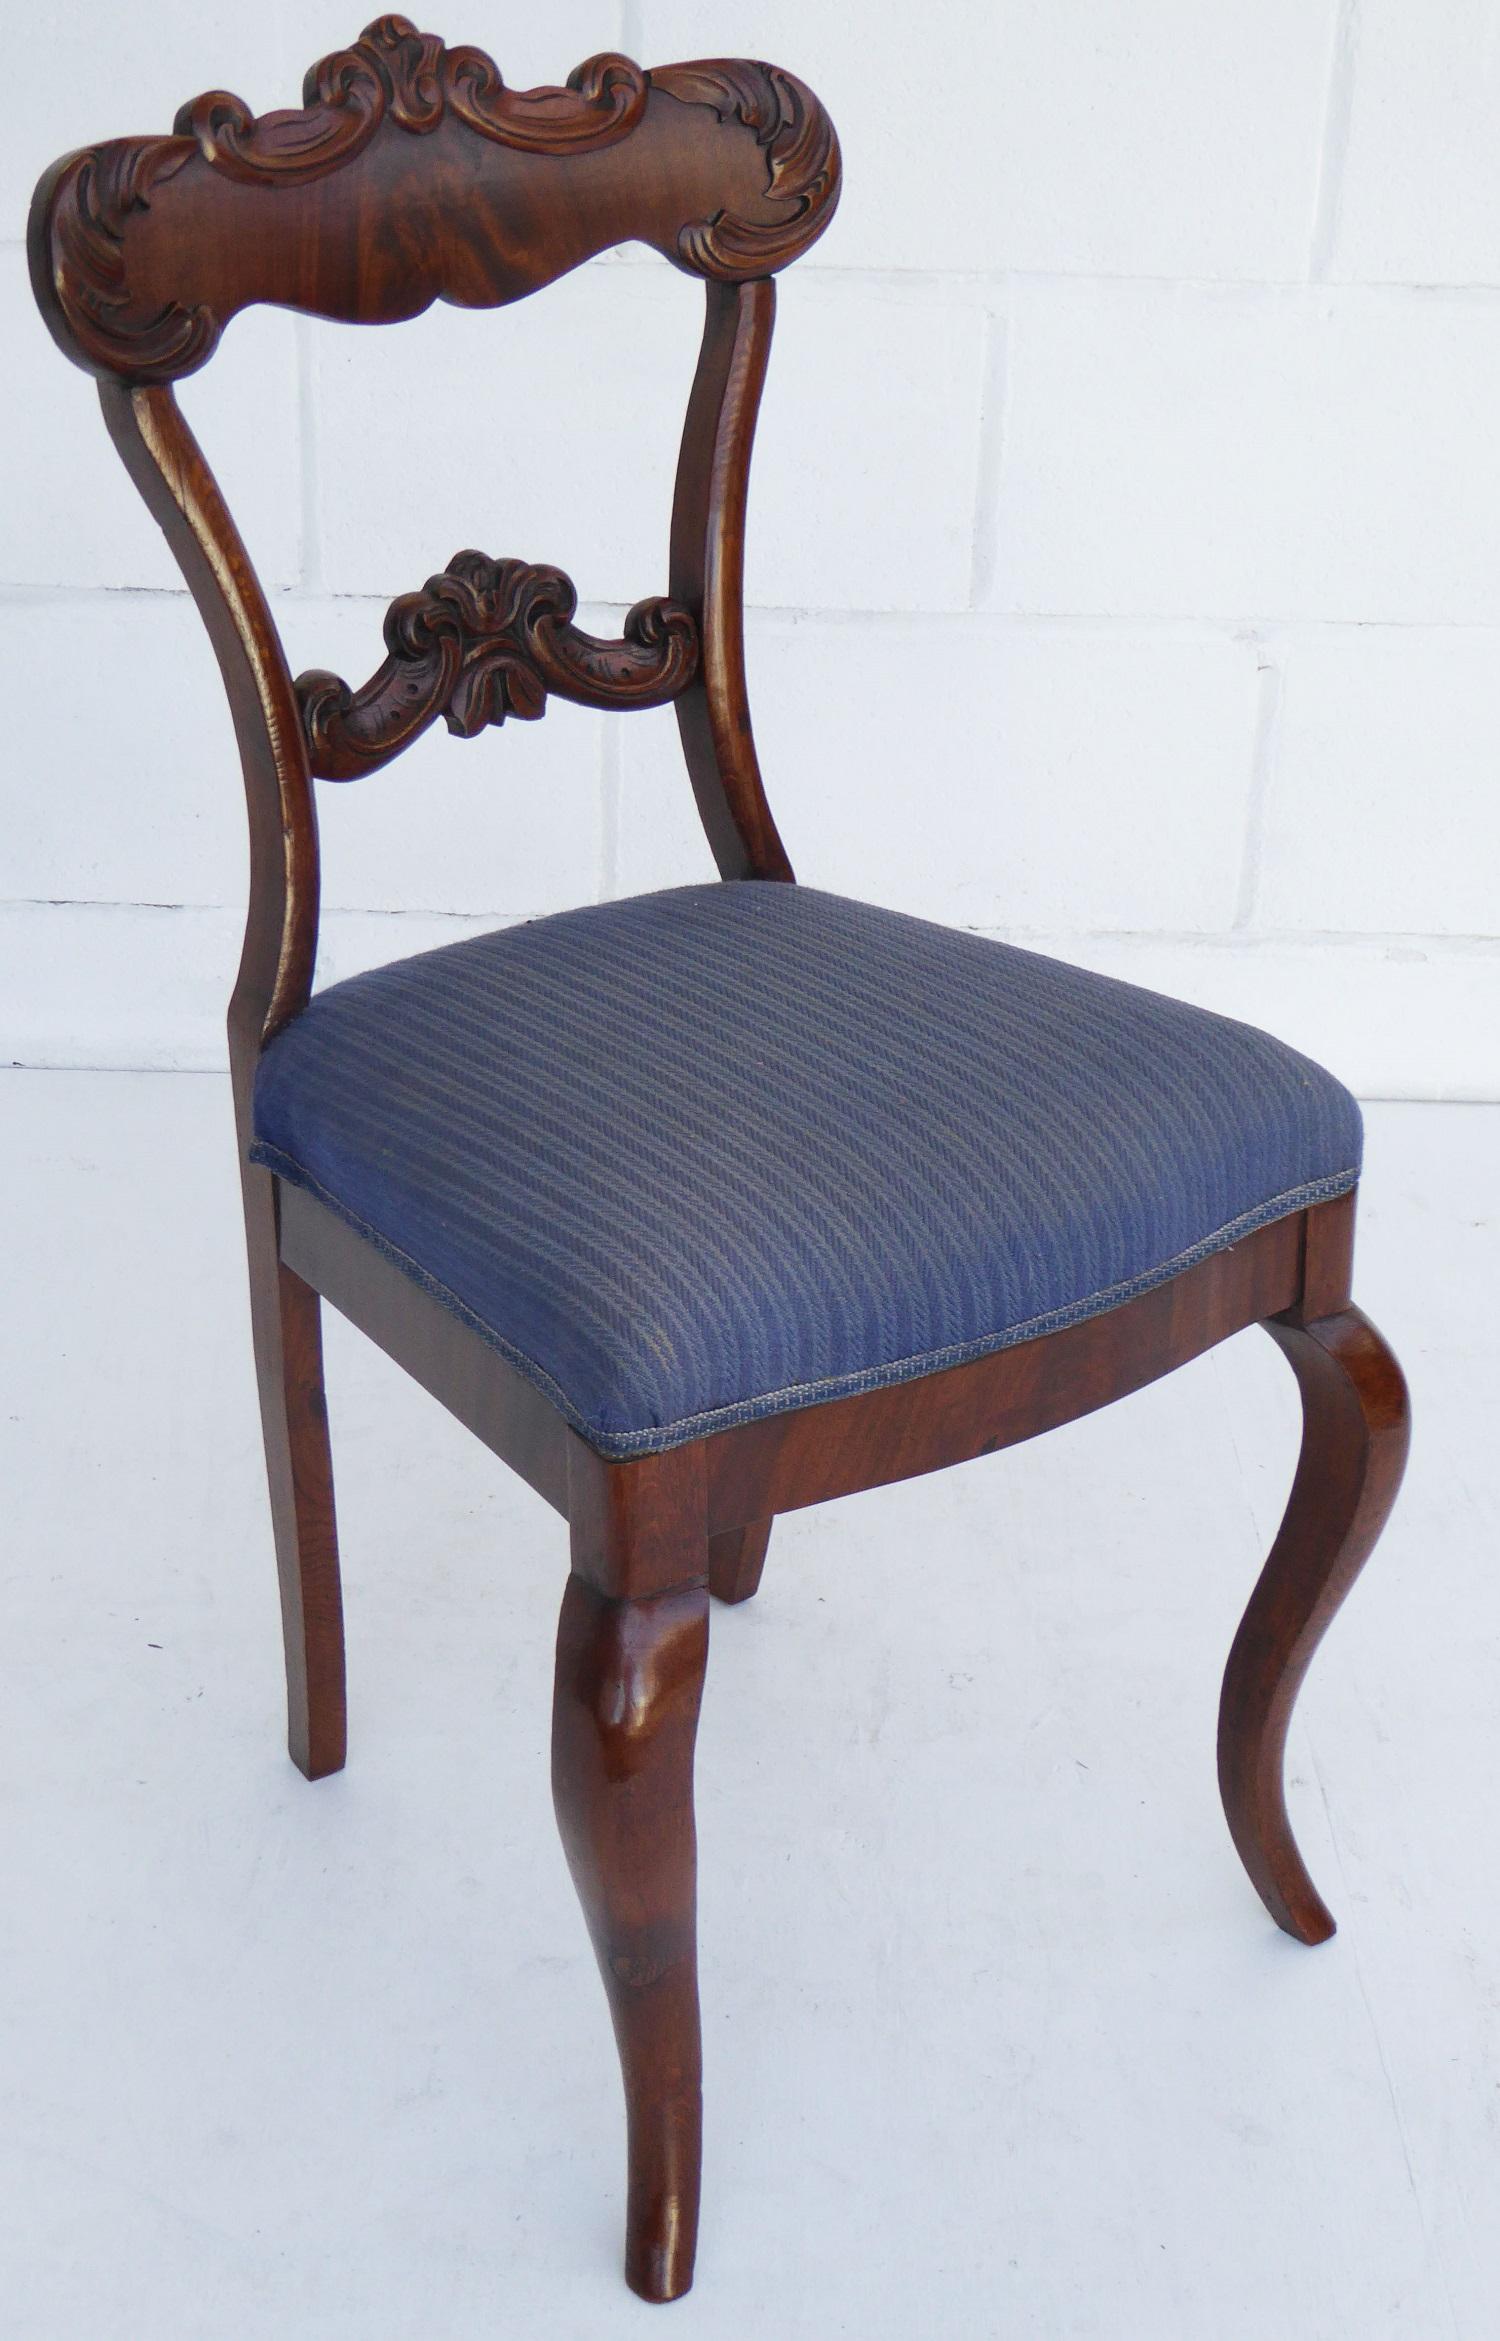 For sale is a set of 8 19th century oak and mahogany dining chairs. Each chair has an ornately shaped and carved back rail, above an upholstered seat, standing on shaped legs. Each chair has been re-finished by hand and is in good